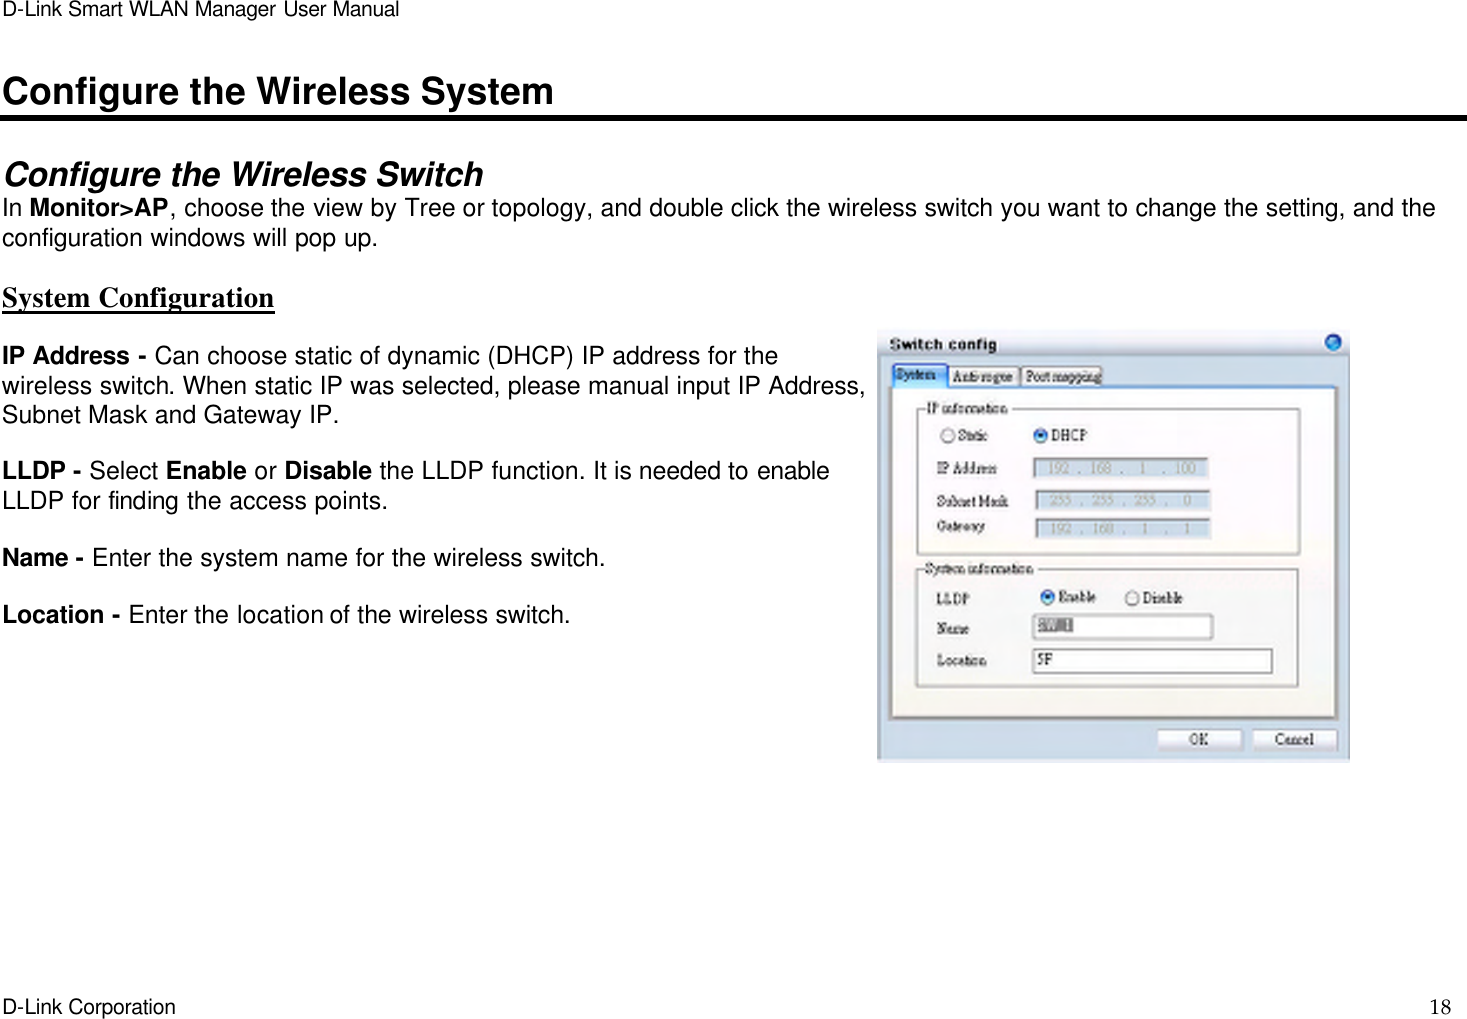 D-Link Smart WLAN Manager User Manual  D-Link Corporation    18  Configure the Wireless System  Configure the Wireless Switch In Monitor&gt;AP, choose the view by Tree or topology, and double click the wireless switch you want to change the setting, and the configuration windows will pop up.  System Configuration  IP Address - Can choose static of dynamic (DHCP) IP address for the wireless switch. When static IP was selected, please manual input IP Address, Subnet Mask and Gateway IP.  LLDP - Select Enable or Disable the LLDP function. It is needed to enable LLDP for finding the access points.  Name - Enter the system name for the wireless switch.  Location - Enter the location of the wireless switch.  